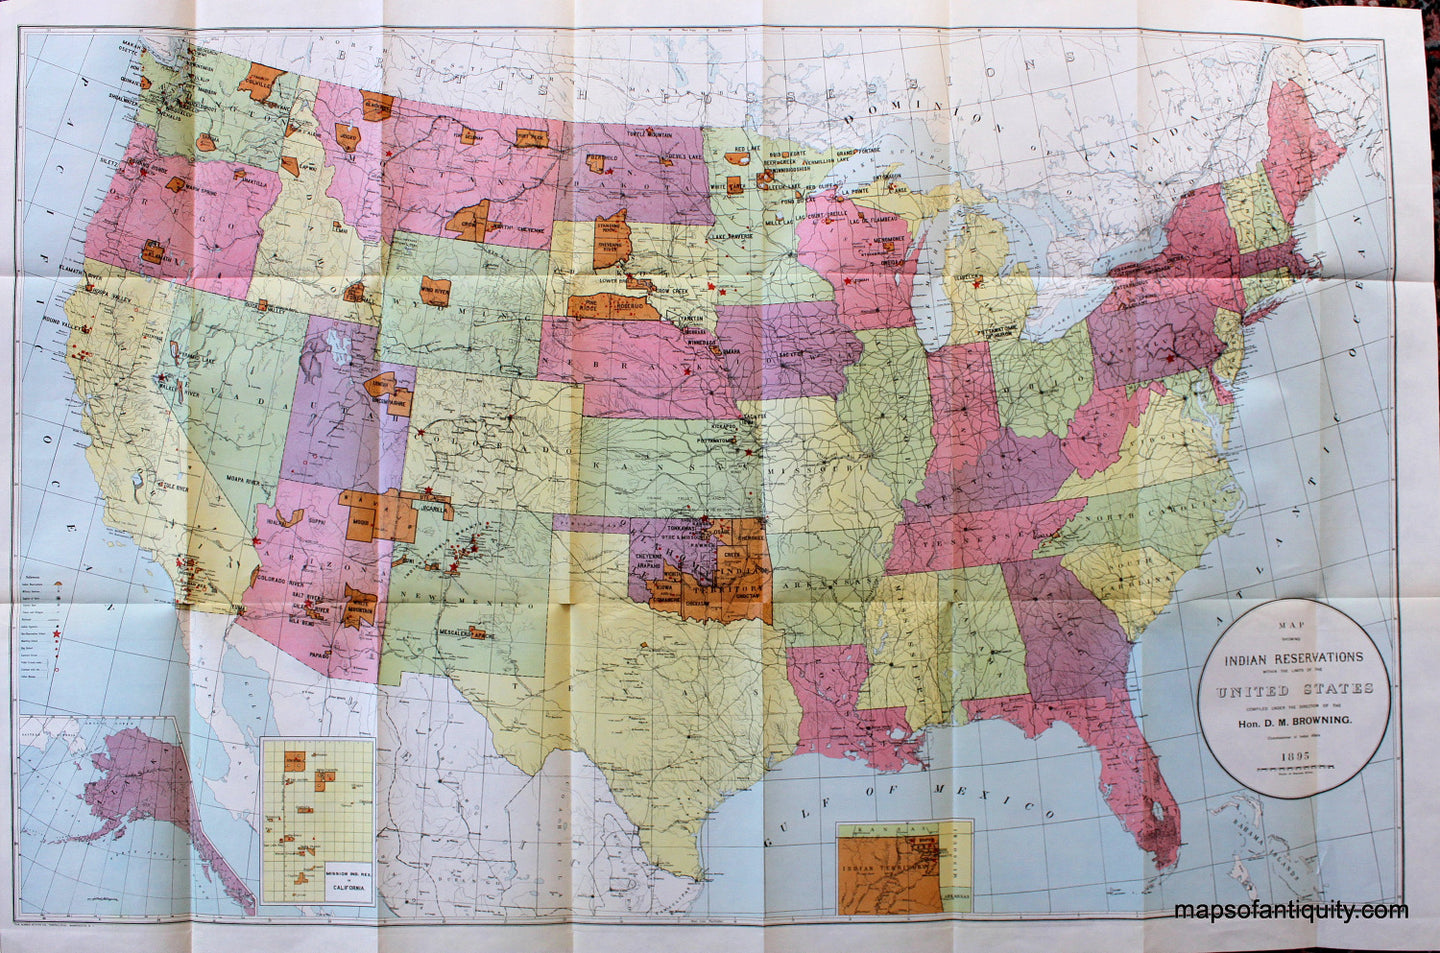 Antique-Map-Printed-Color-Map-showing-Indian-reservations-within-the-limits-of-the-United-States-compiled-under-the-direction-of-the-Hon.-D.-M.-Browning-Commissioner-of-Indian-Affairs-United-States--1895-Browning-Maps-Of-Antiquity